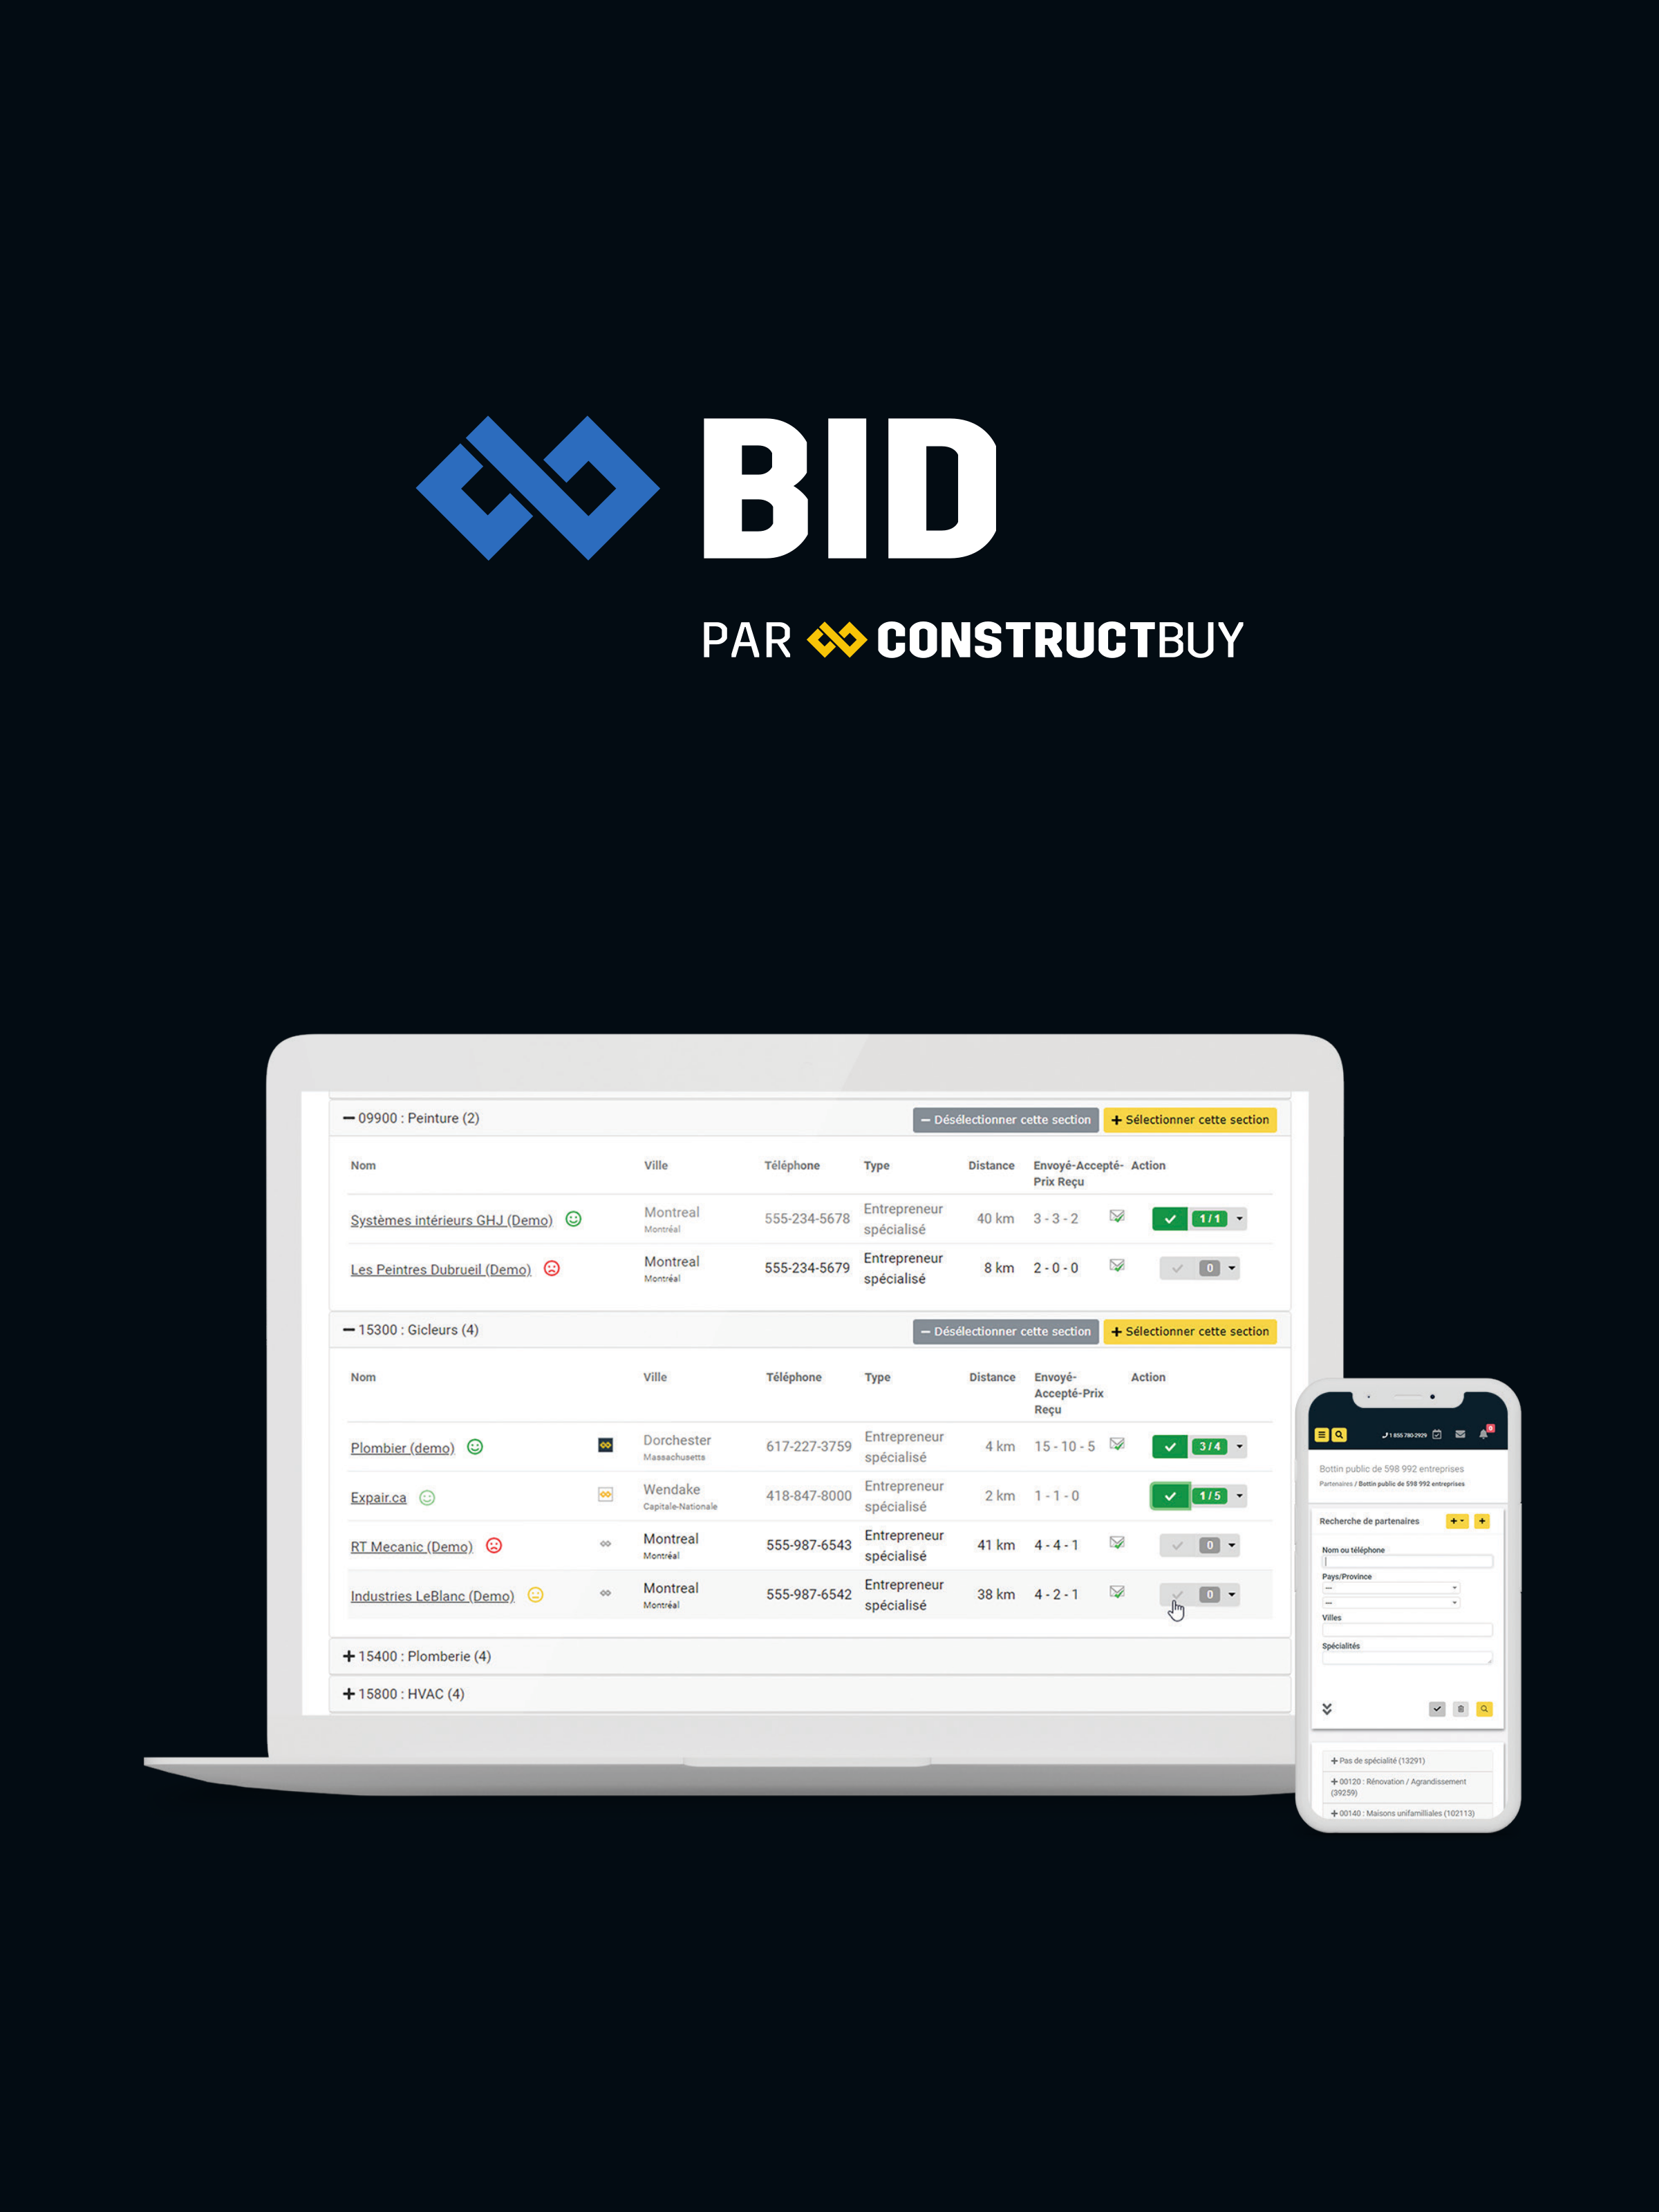 Digital tool for construction quotes and project bidding. Lower your projects costs by sending private invitations to bid or by a public call for tenders to the tens of thousands of contractors and suppliers already using ConstructBuy.